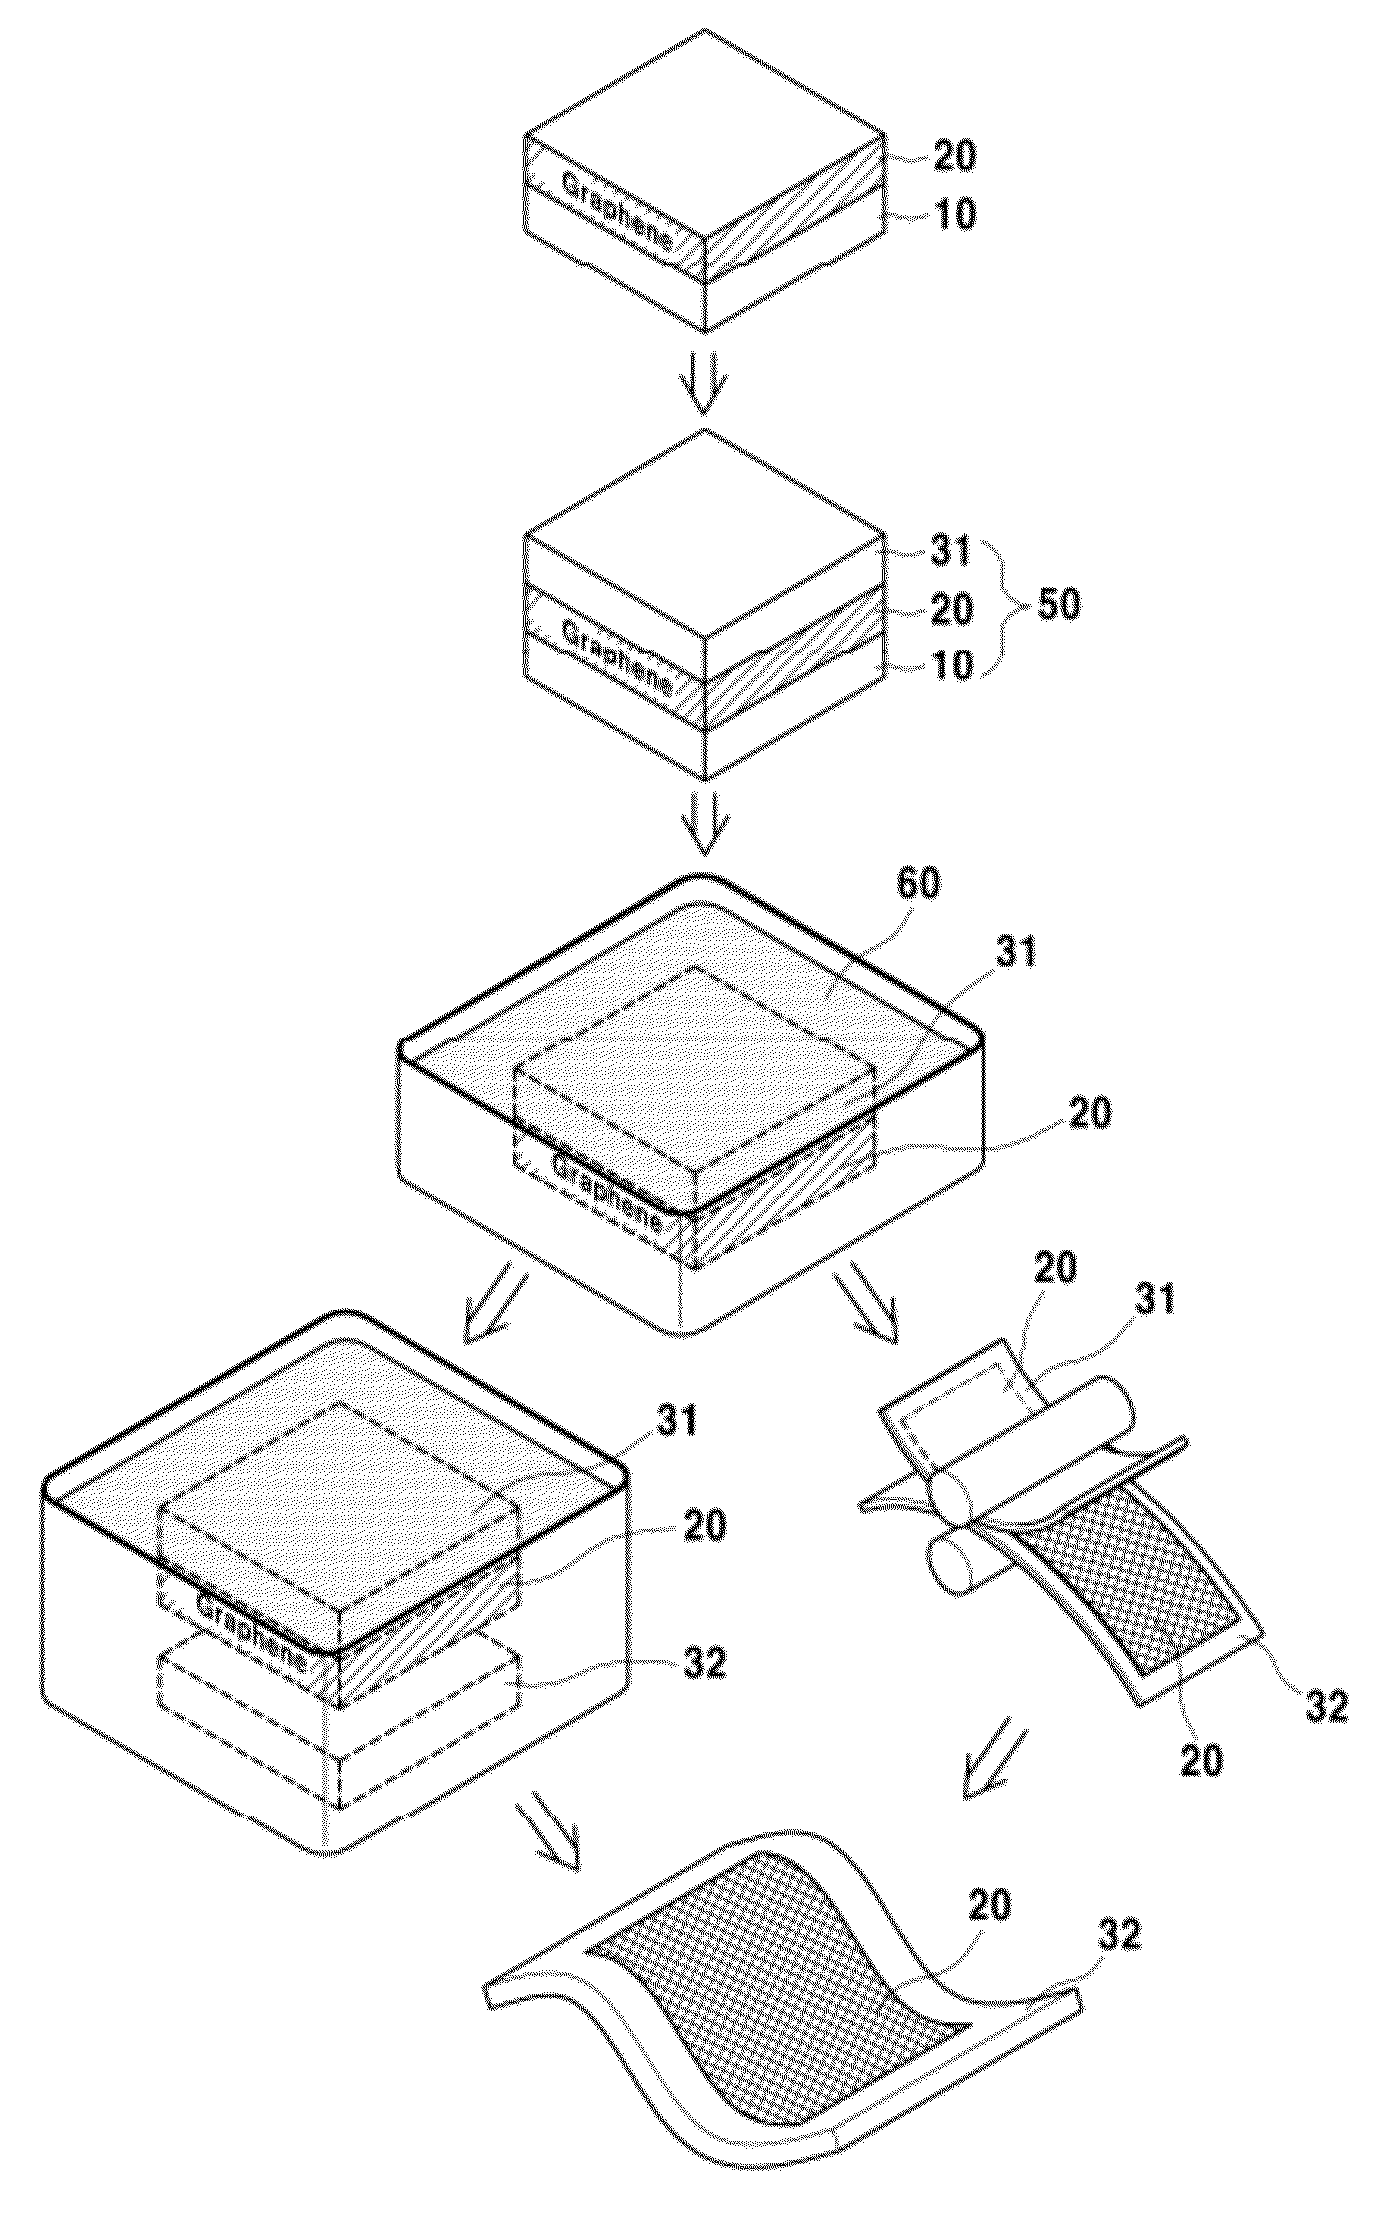 Graphene protective film serving as a gas and moisture barrier, method for forming same, and use thereof